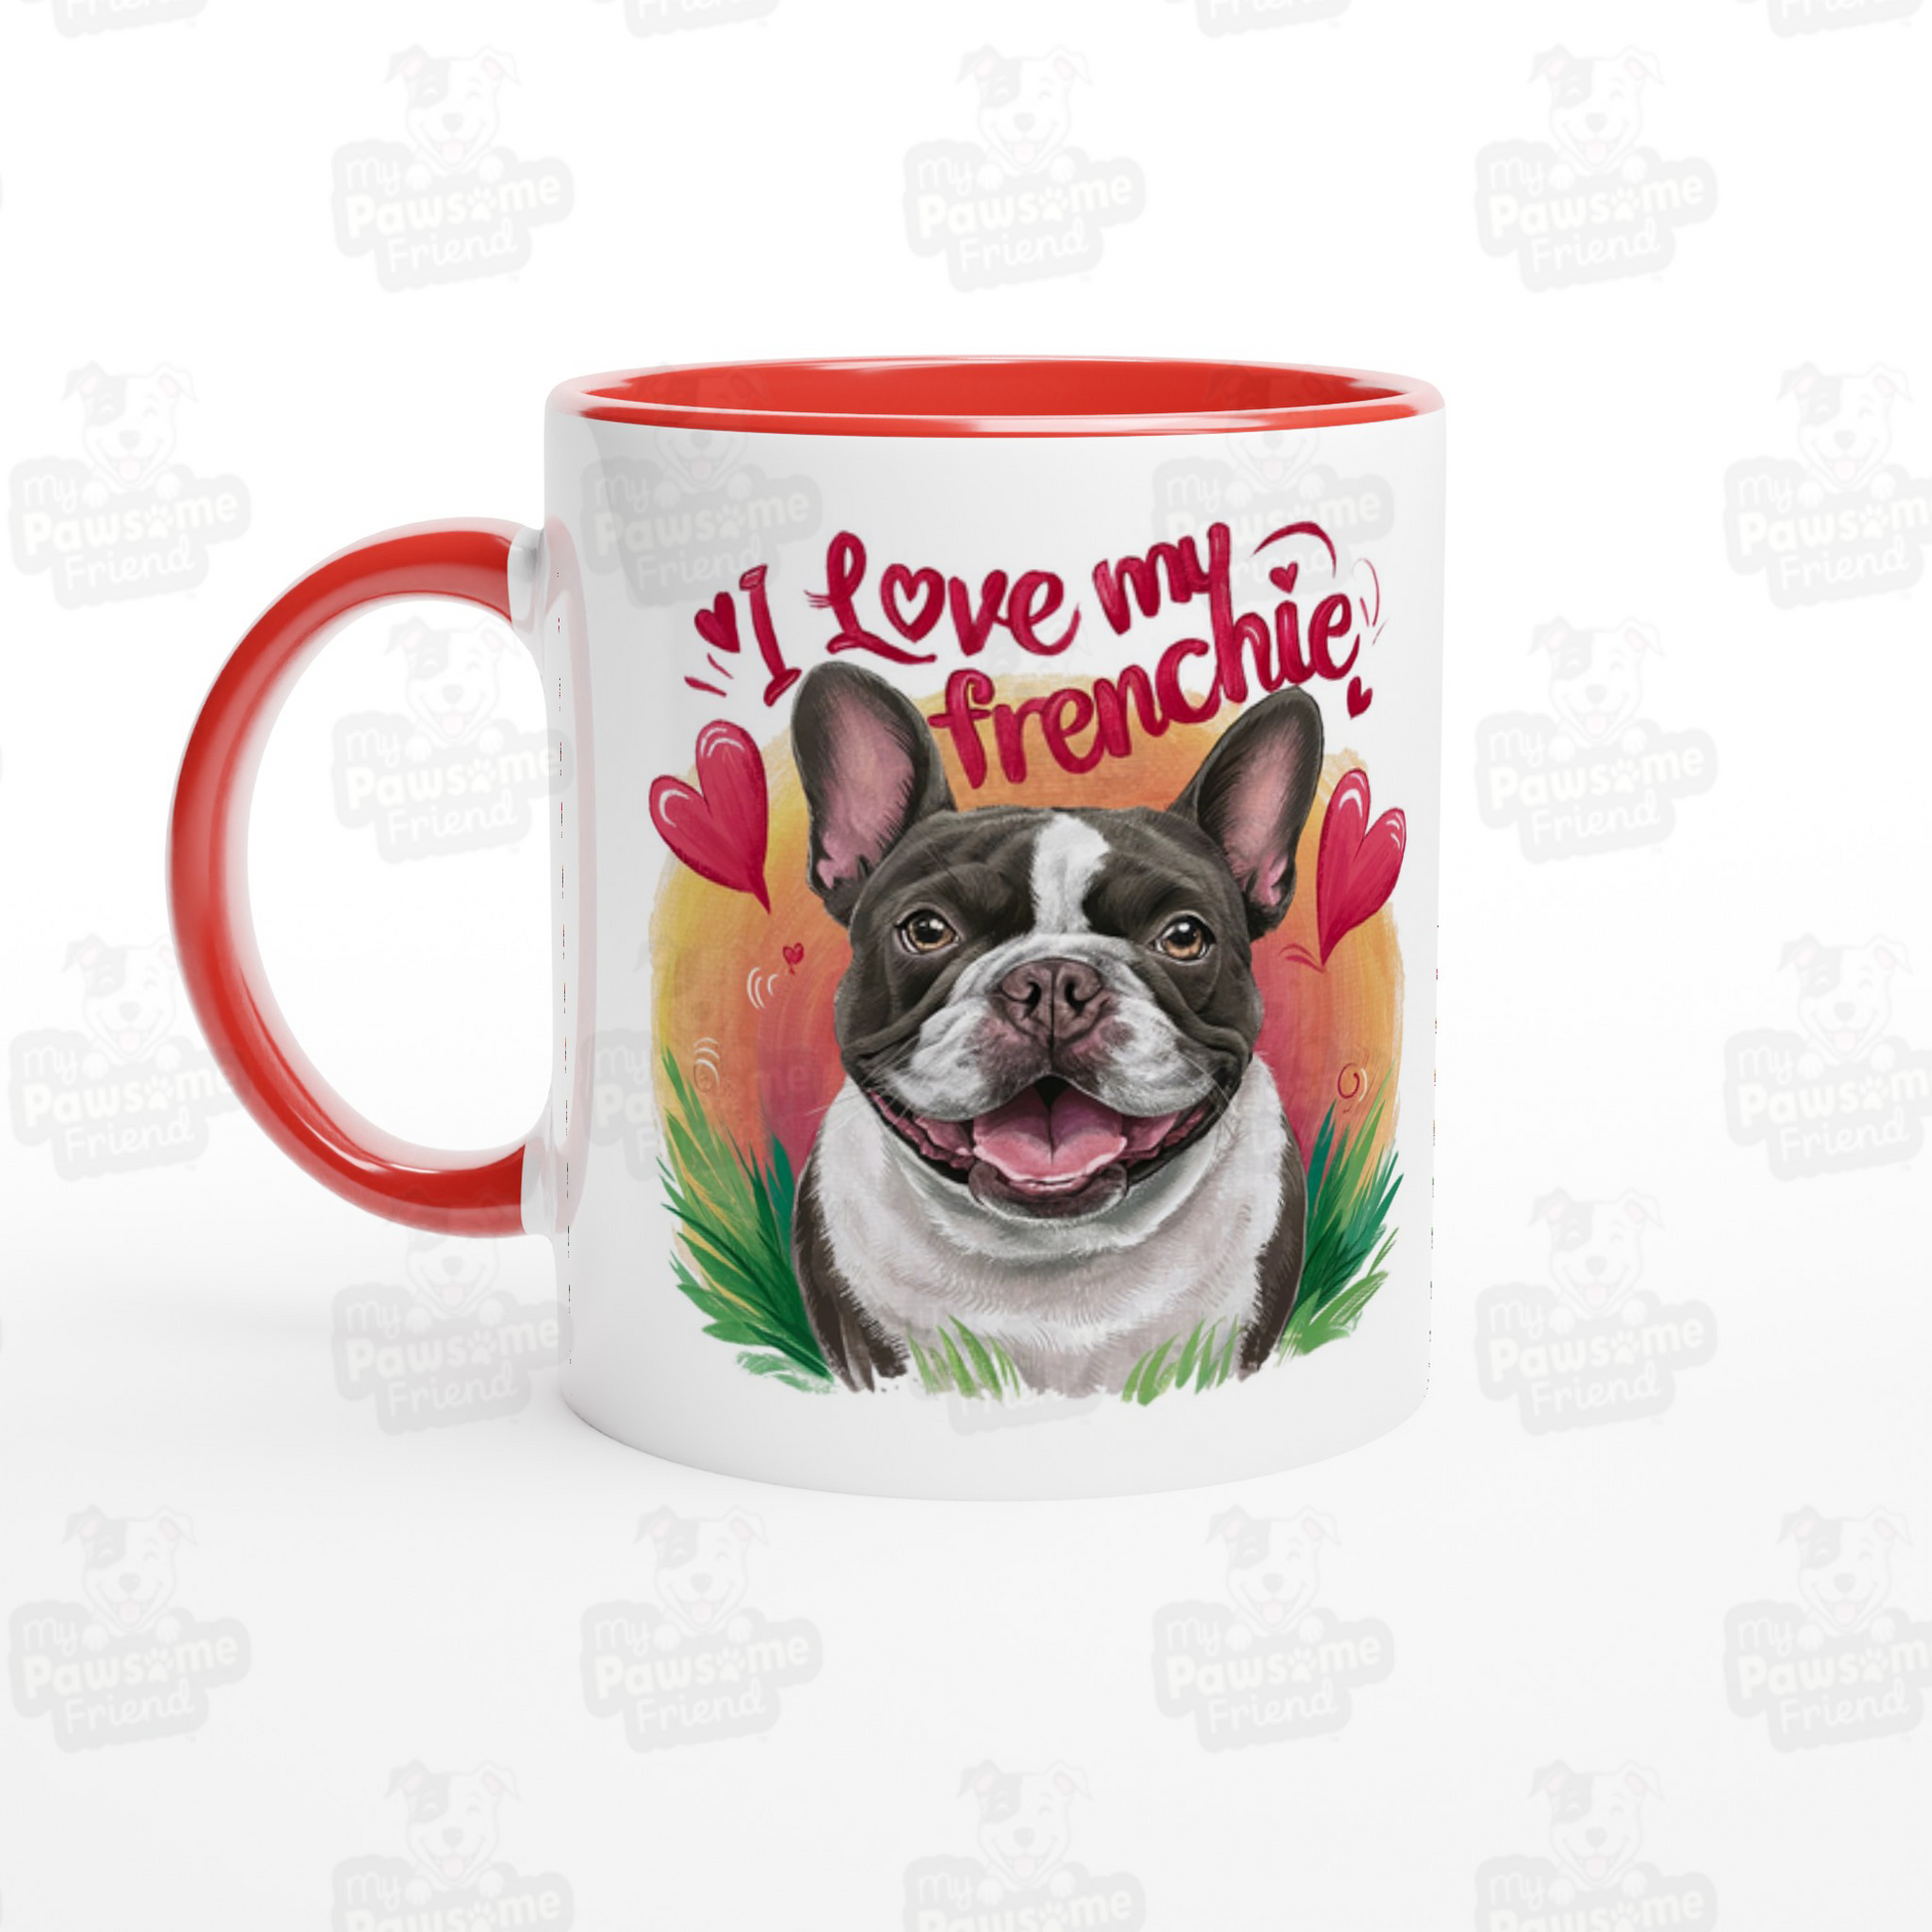 A coffee mug with a cute design featuring a french bulldog smiling surrounded by heart designs, and the phrase "I love my Frenchie". The handle color of the coffee mug is red